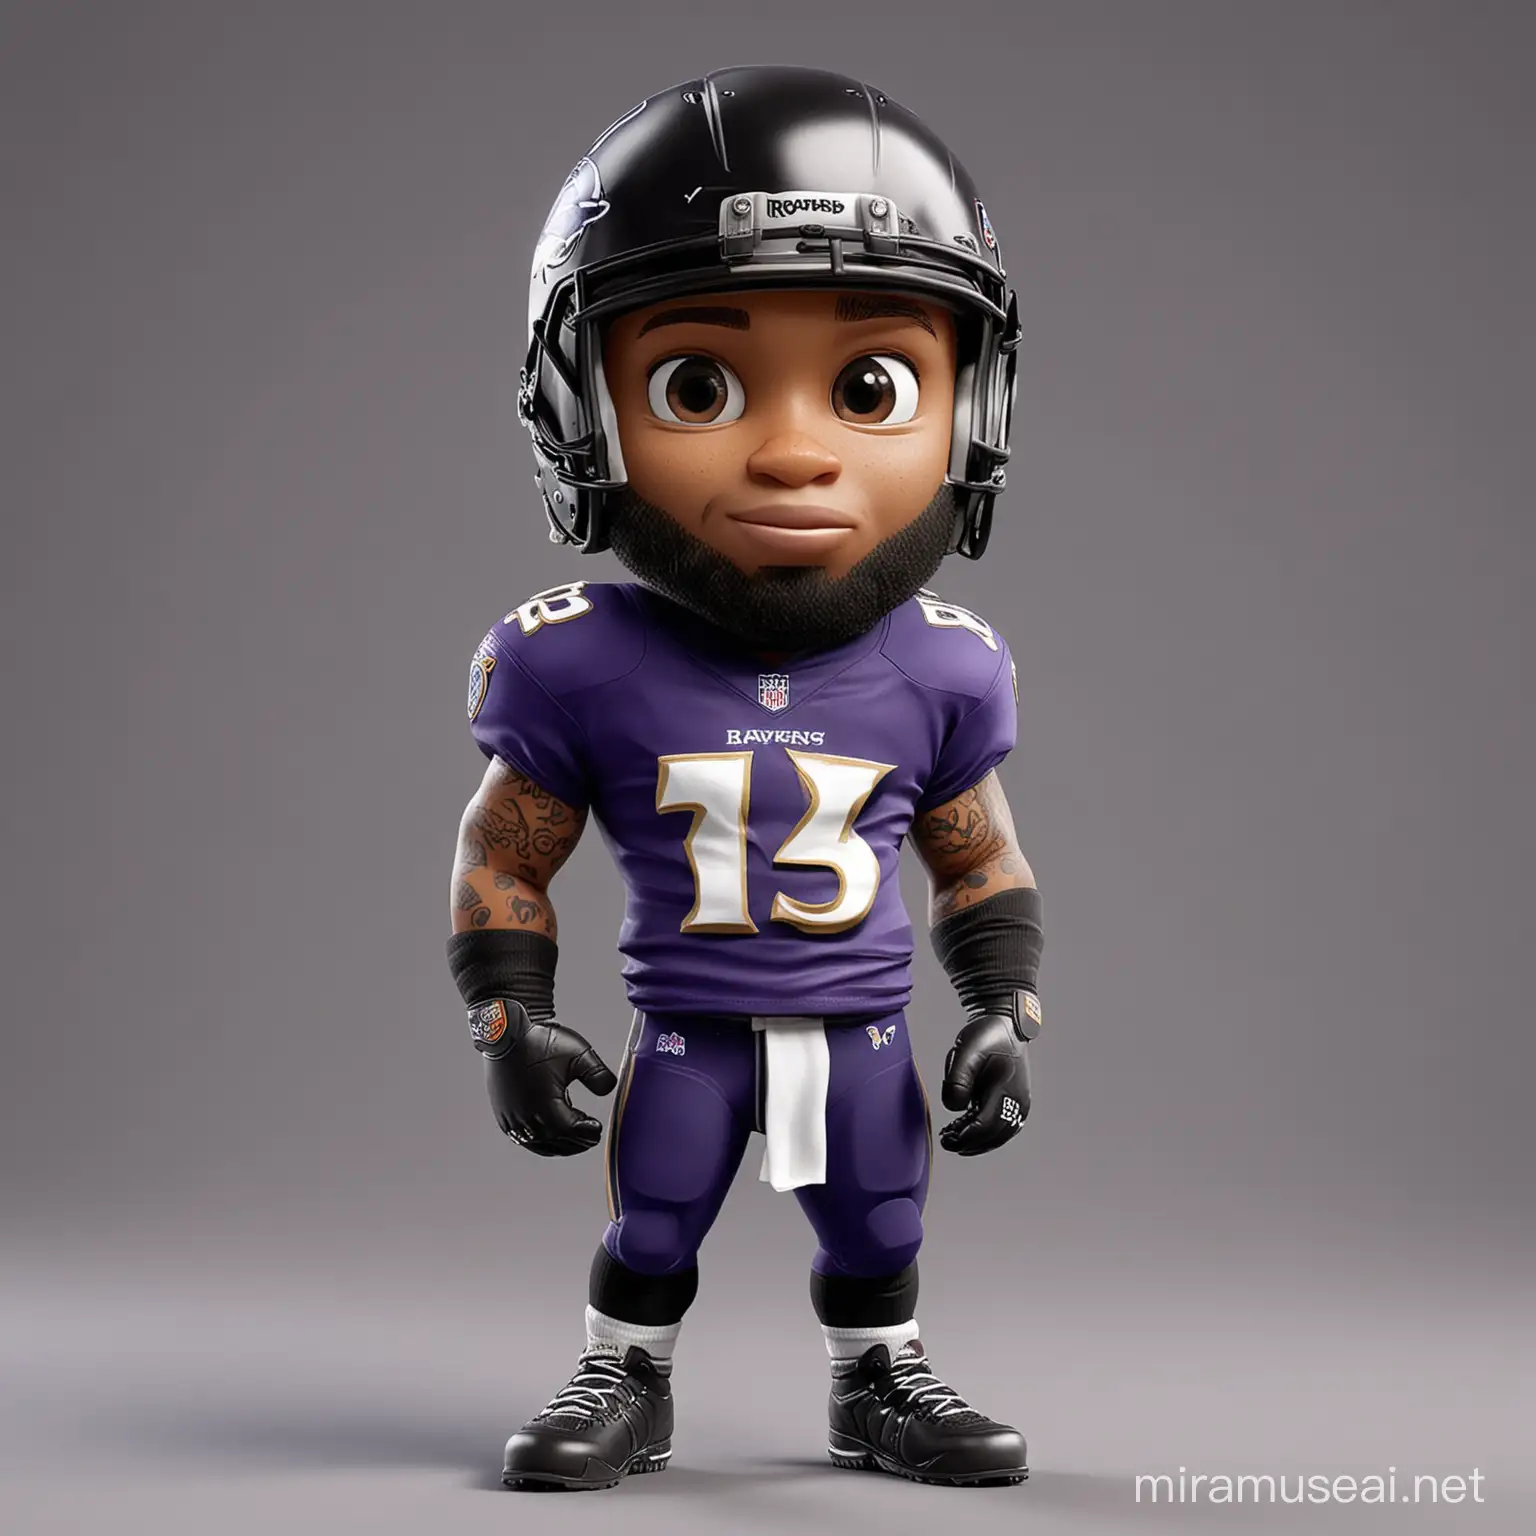 Adorable 3D Rendered NFL Player in Baltimore Ravens Gear